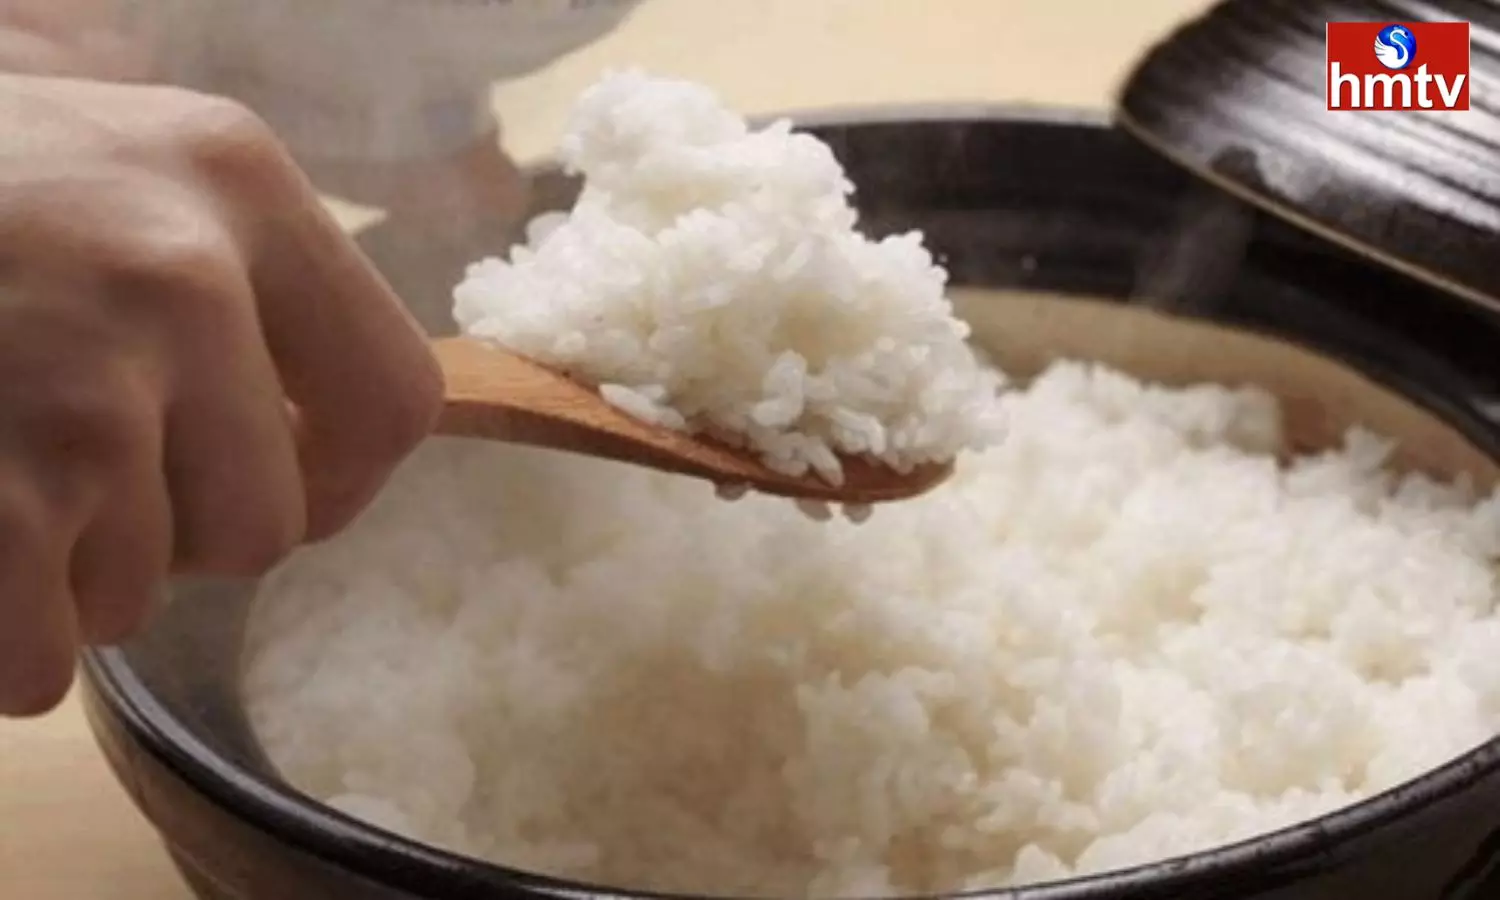 Will you gain weight if you eat rice find out what the experts are saying